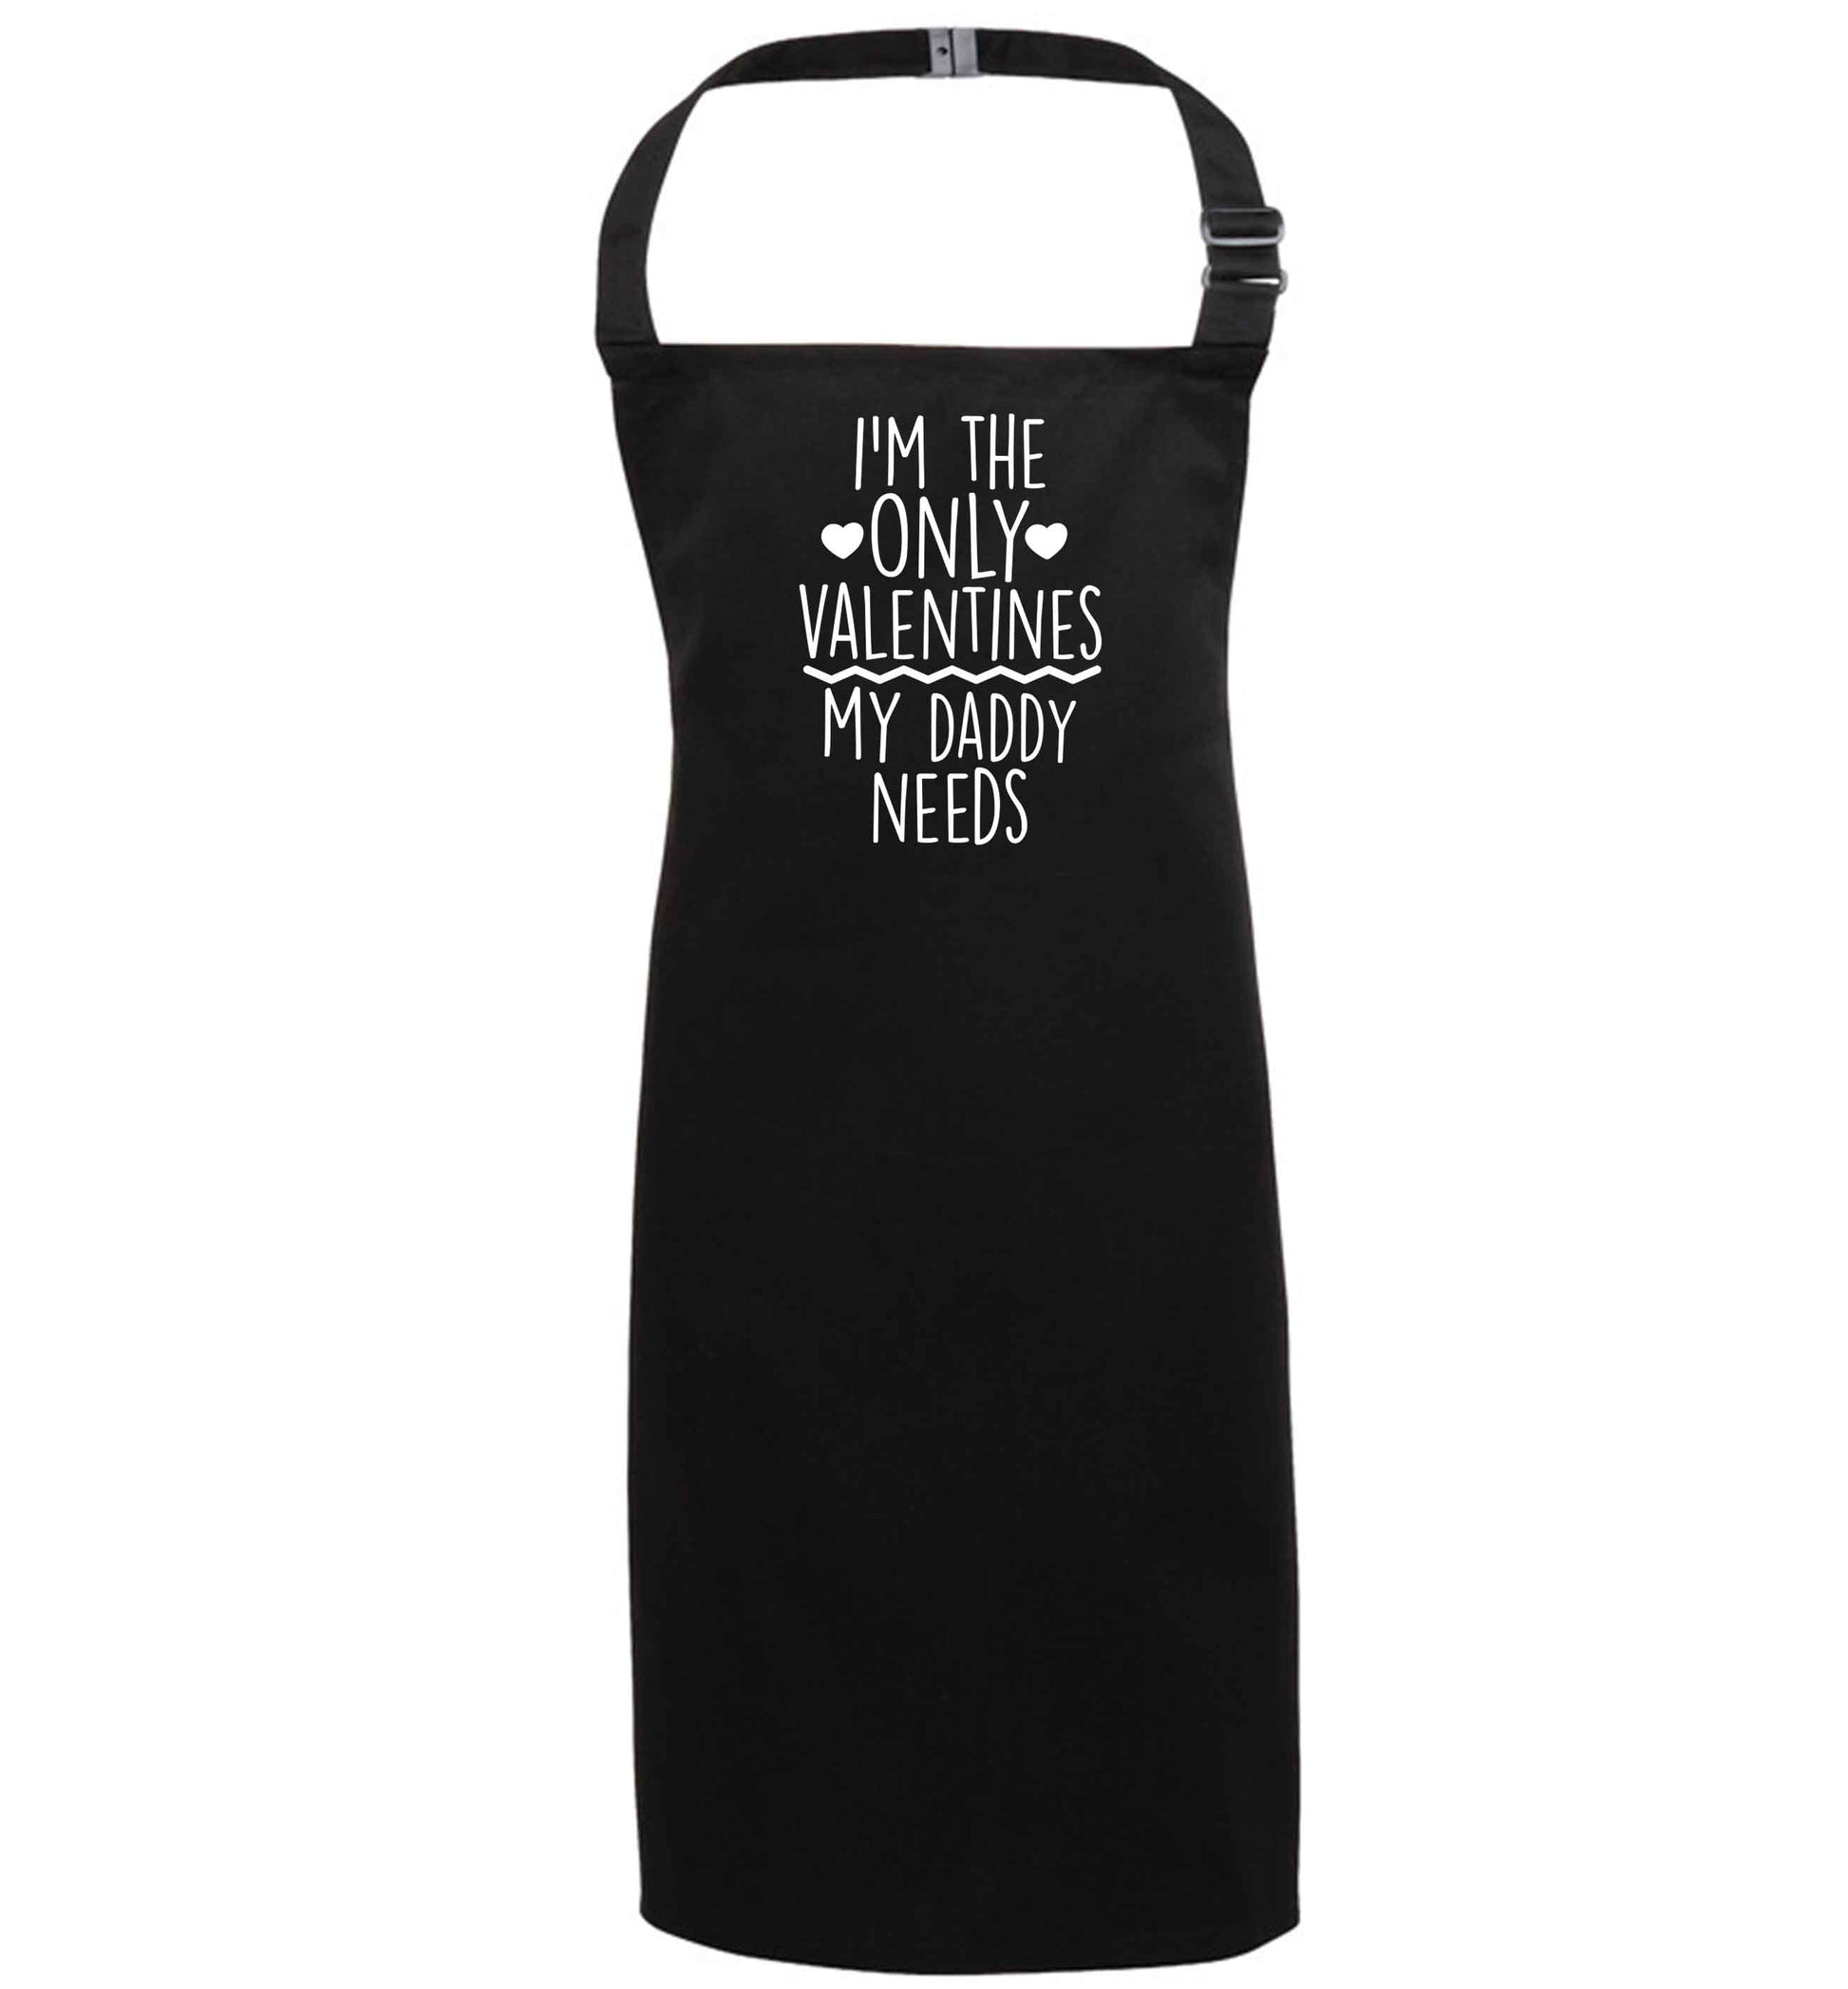 I'm the only valentines my daddy needs black apron 7-10 years